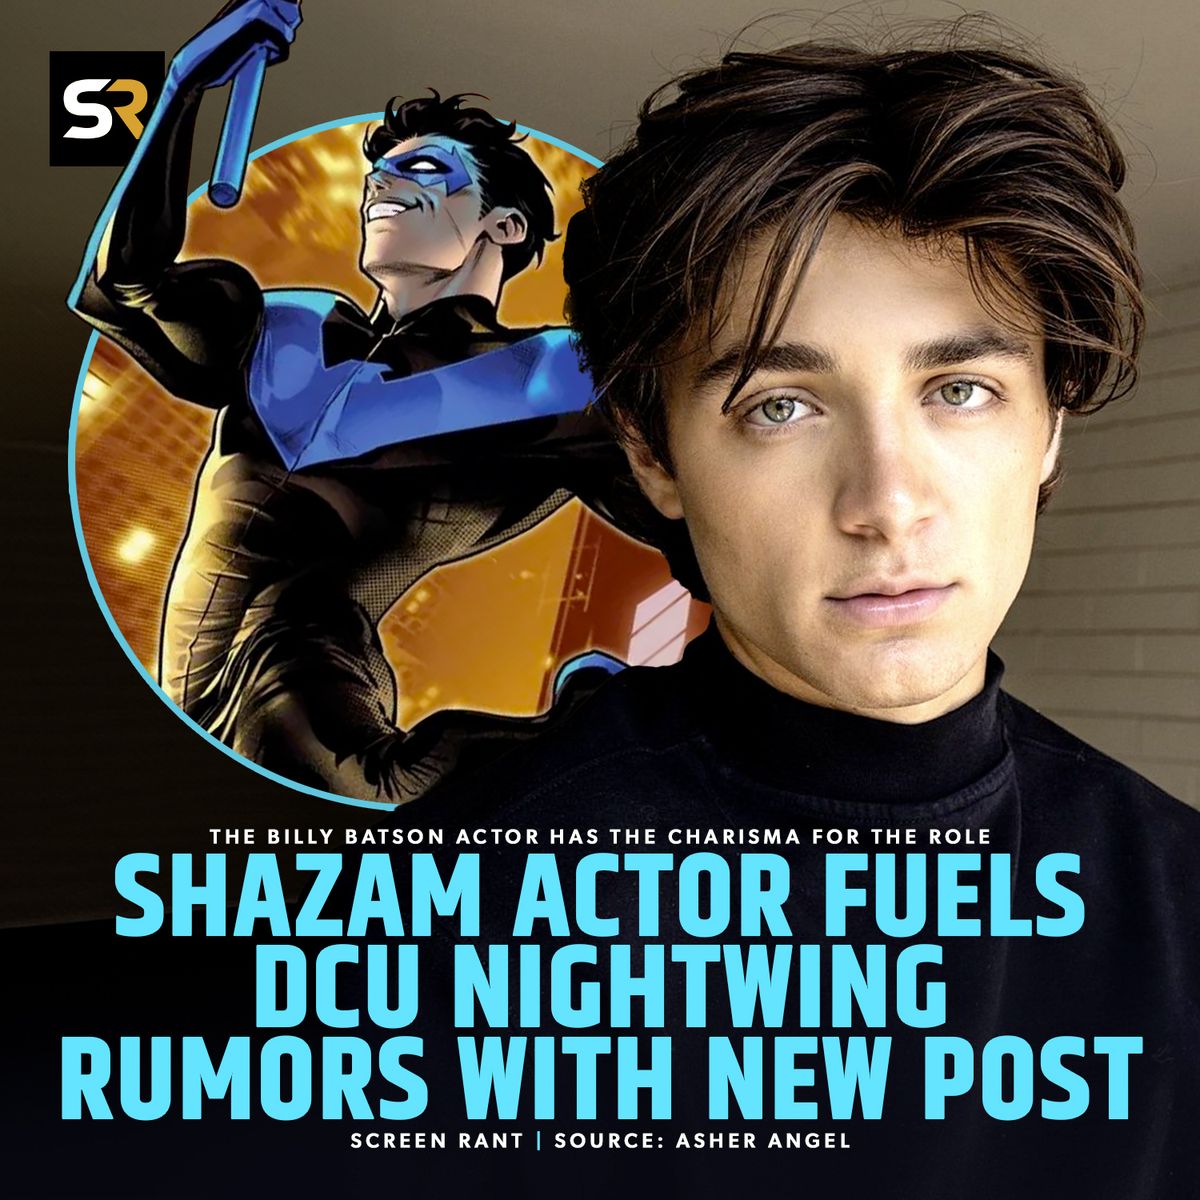 Shazam!'s Billy Batson actor Asher Angel teased a possible DC Universe role by posting a Nightwing GIF with... no other context! 💙 The actor is a popular fancast to play Dick Grayson in the DCU, which makes this tease all the more exciting. 🤩 bit.ly/4bGGdOt